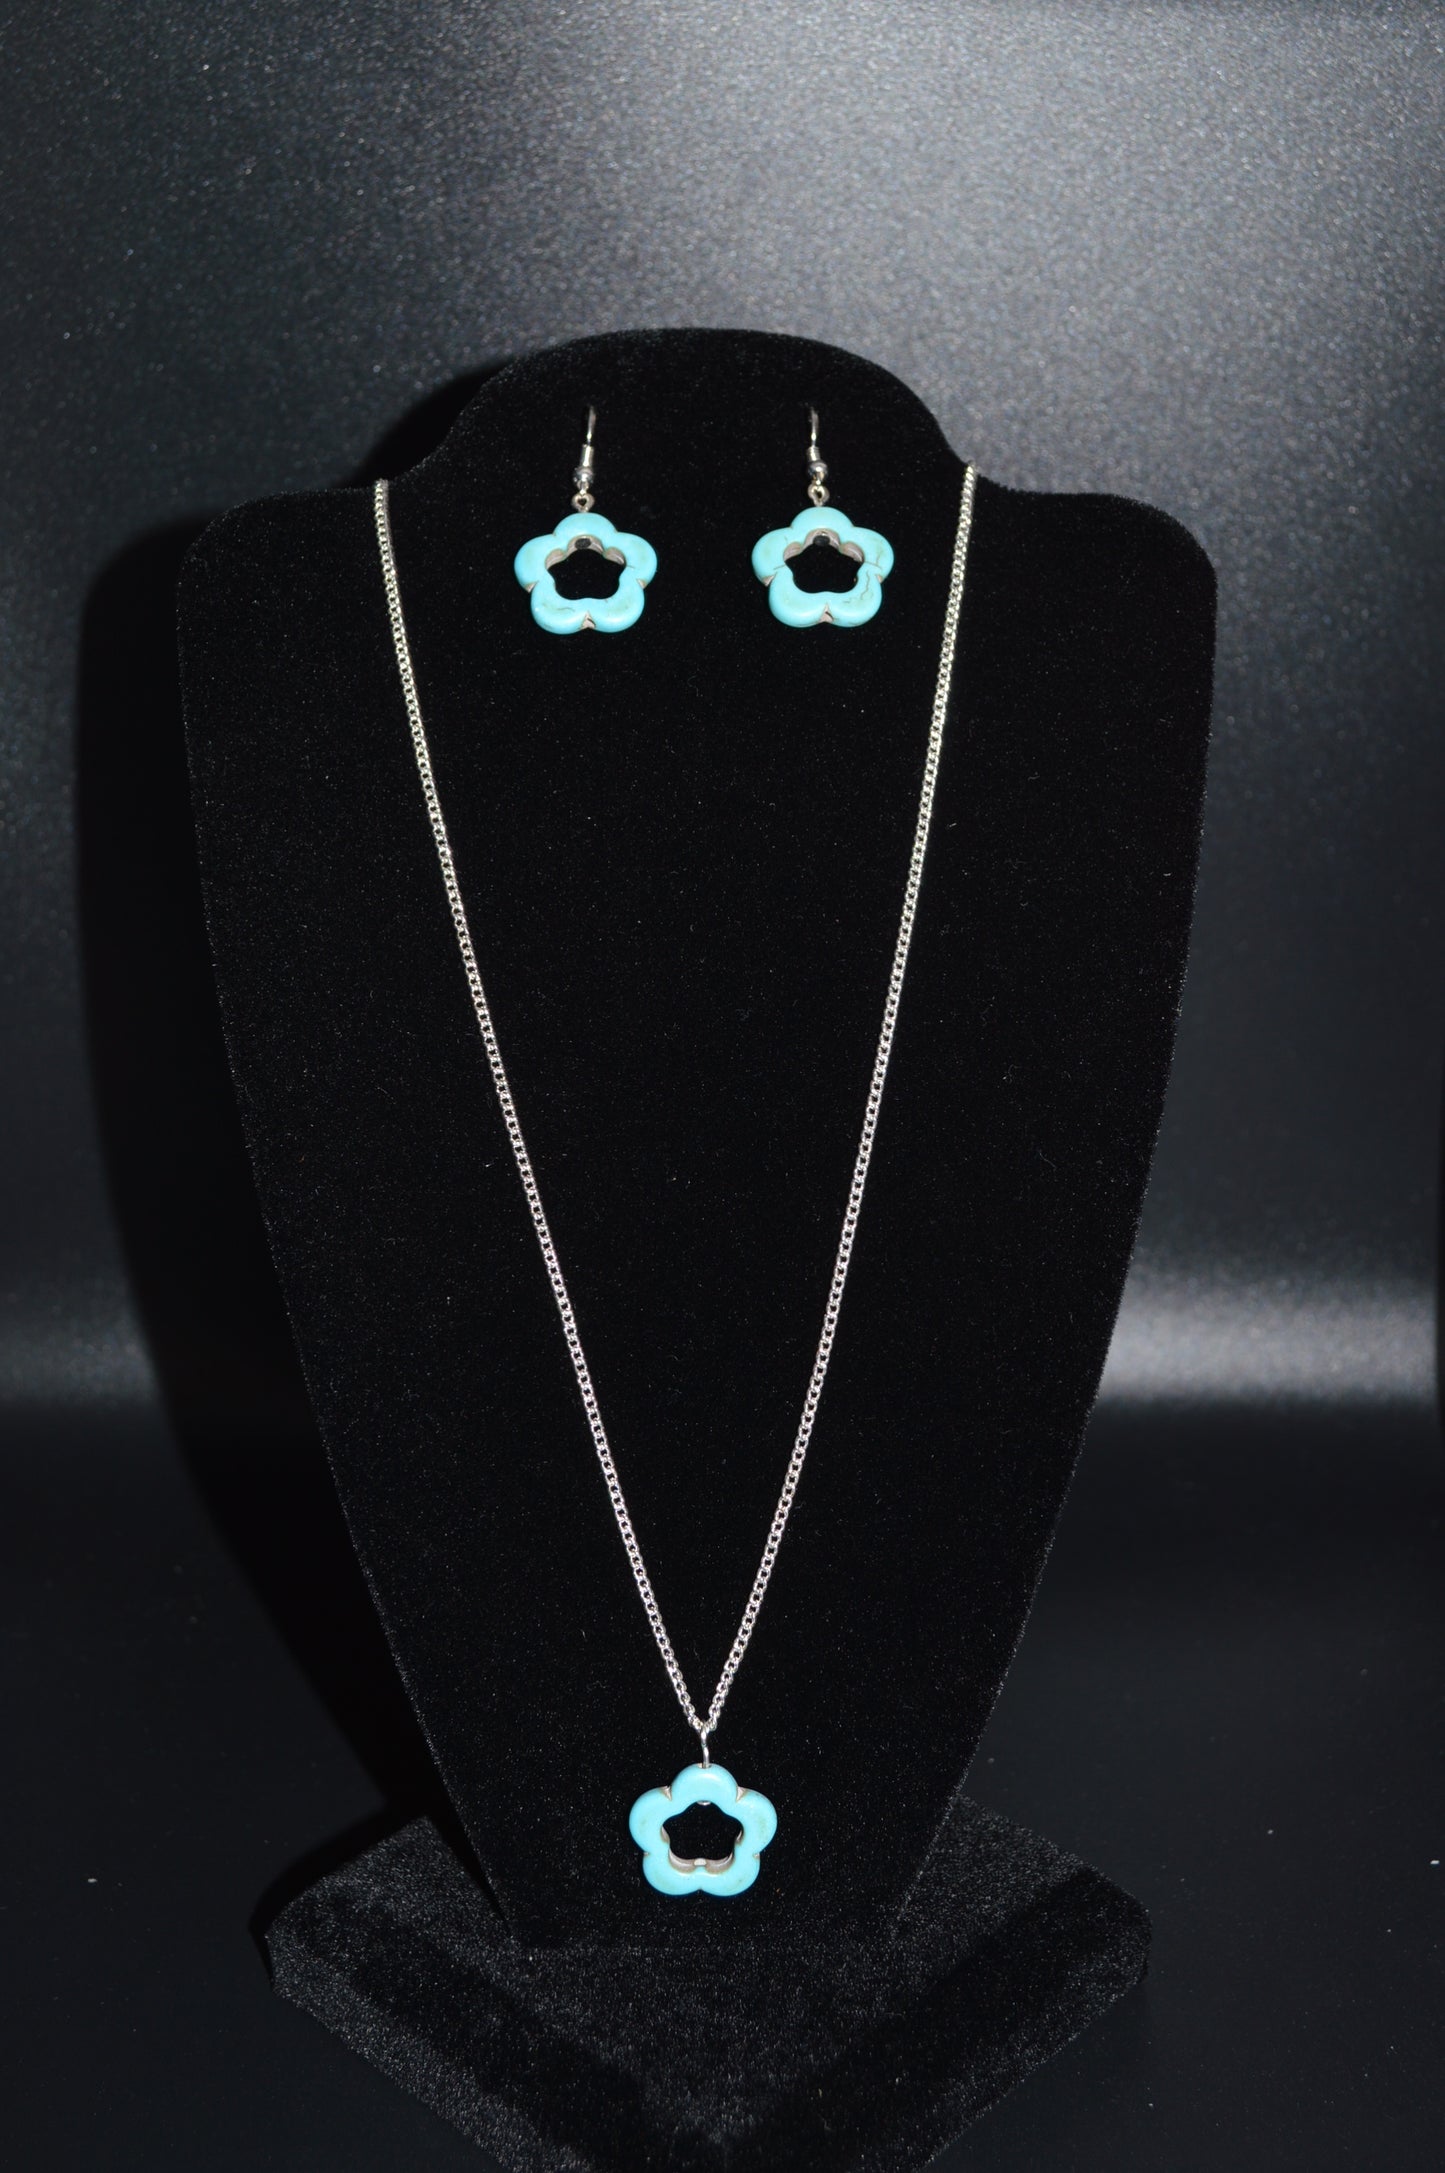 Small Magnesite Flower Pendant Necklace and Earring Set (Turquoise)